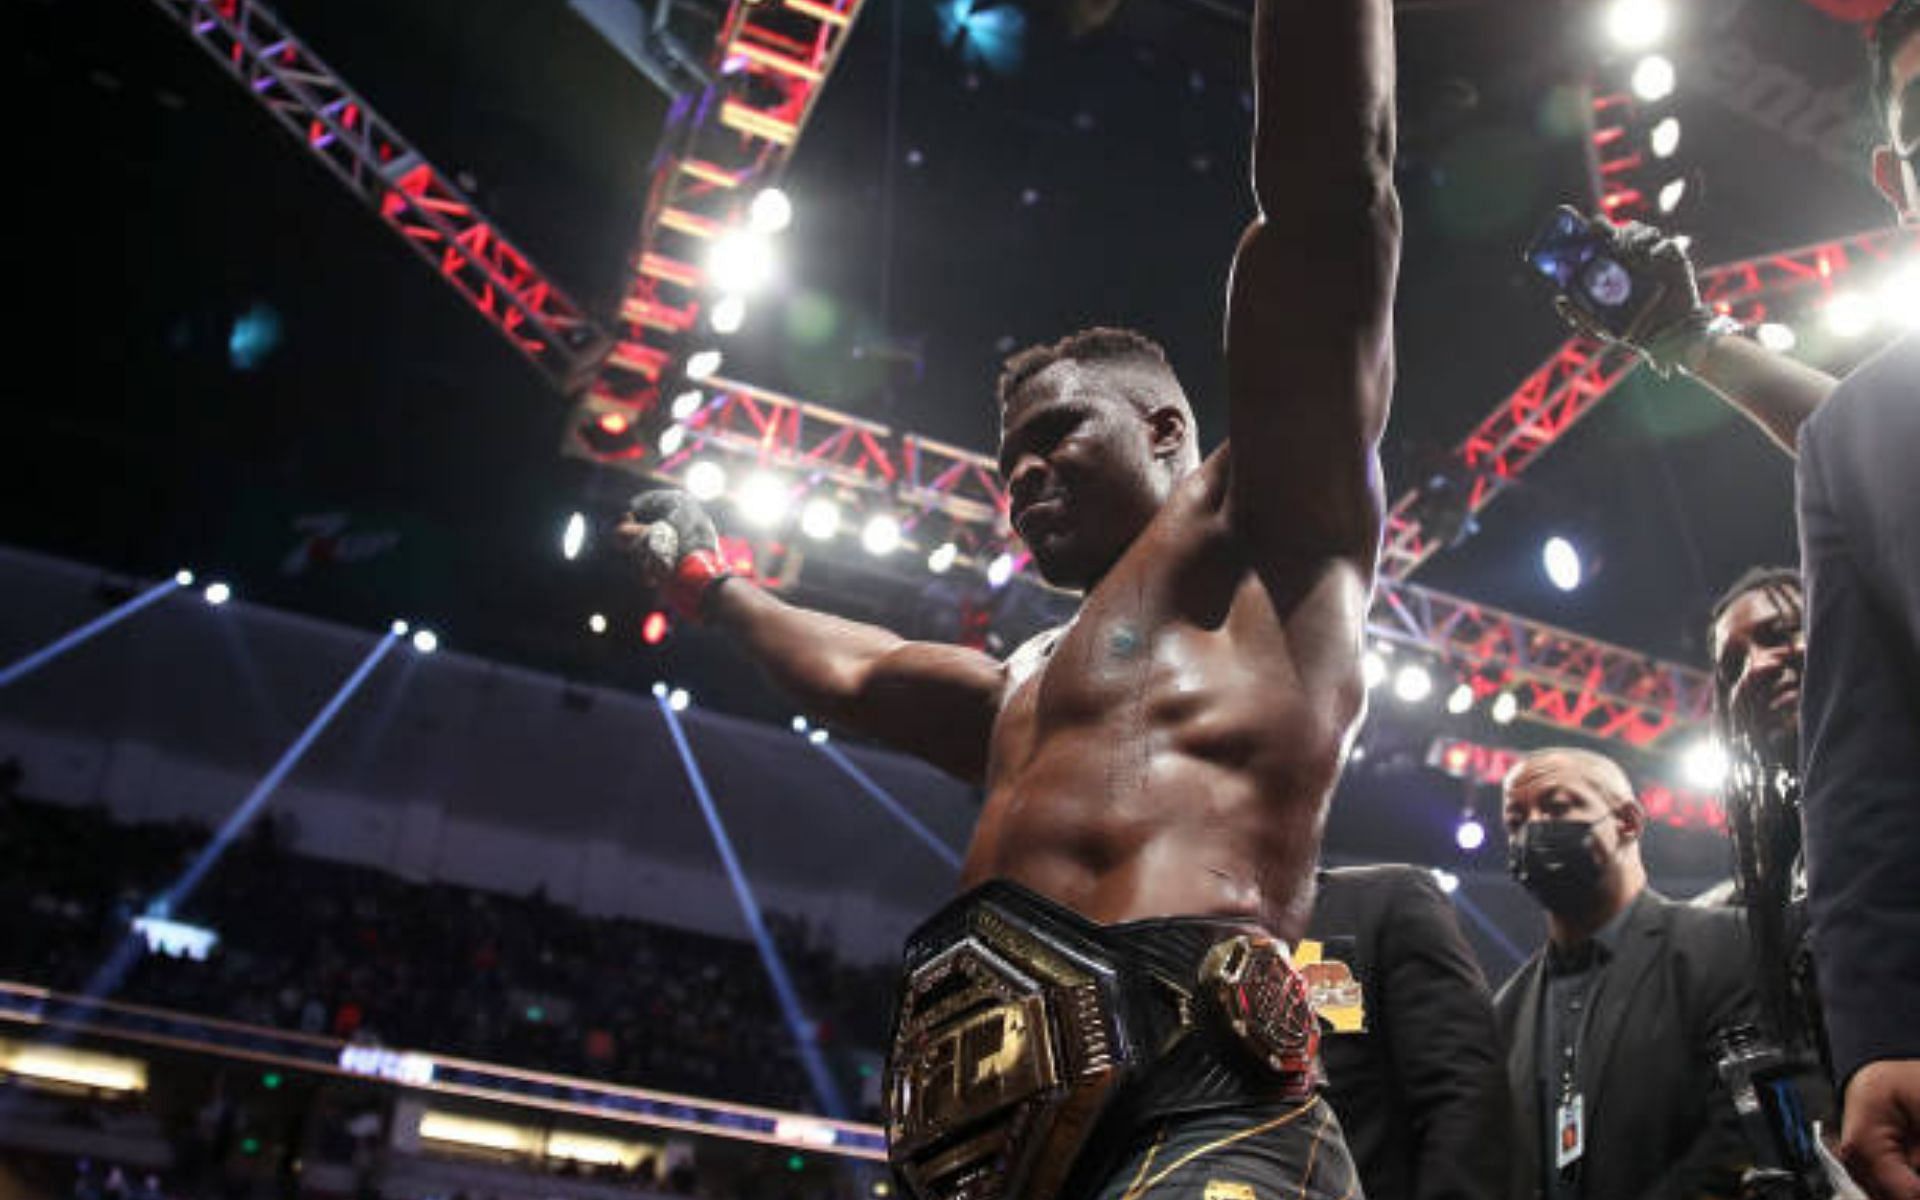 Free agent mixed martial artist Francis Ngannou